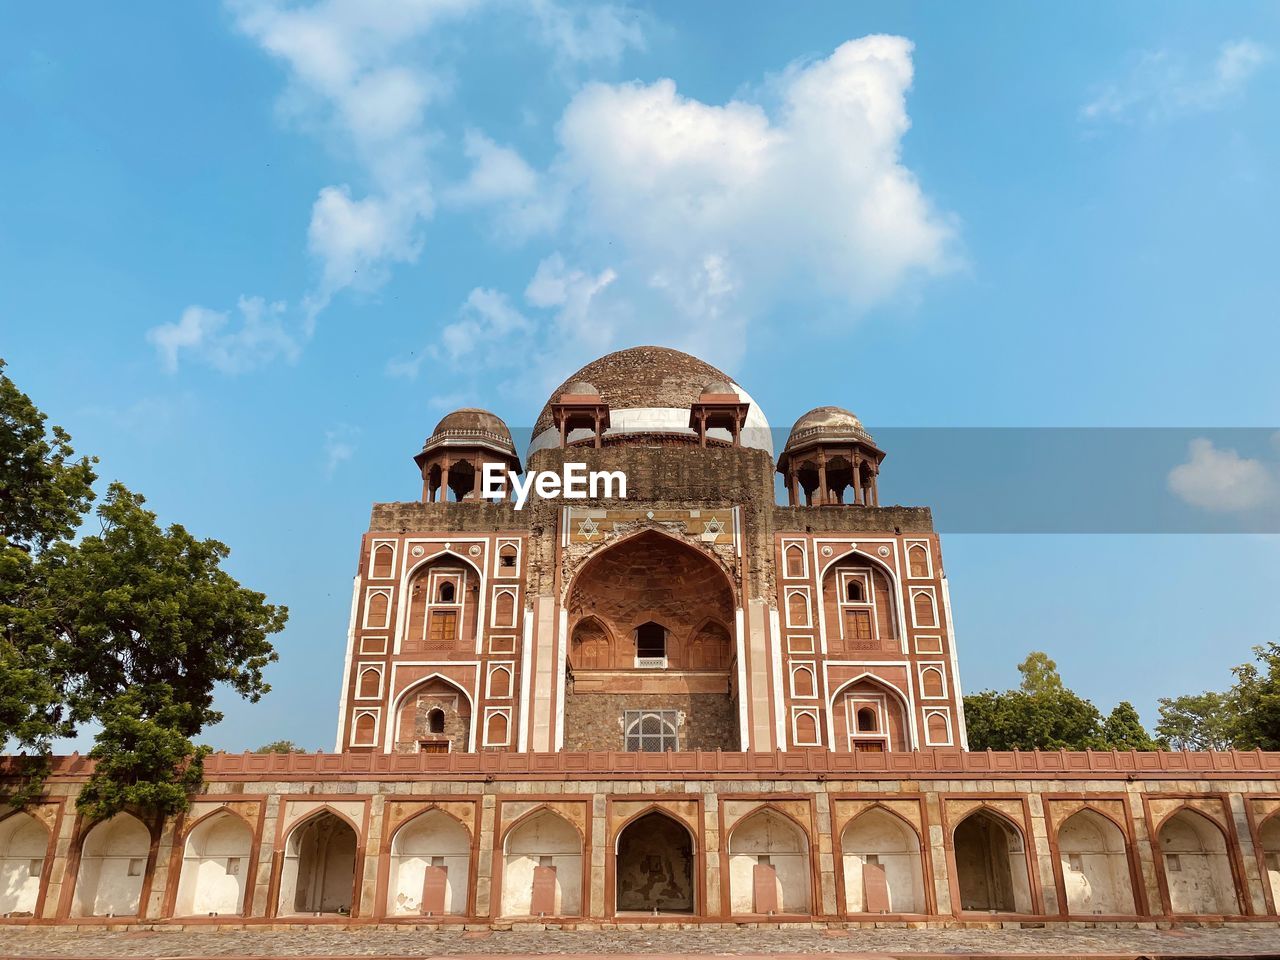 architecture, landmark, travel destinations, built structure, sky, arch, building, religion, travel, place of worship, history, building exterior, nature, the past, cloud, tourism, historic site, city, ancient history, tomb, tree, ancient, outdoors, brick, dome, marble, blue, plant, calligraphy, monument, memorial, day